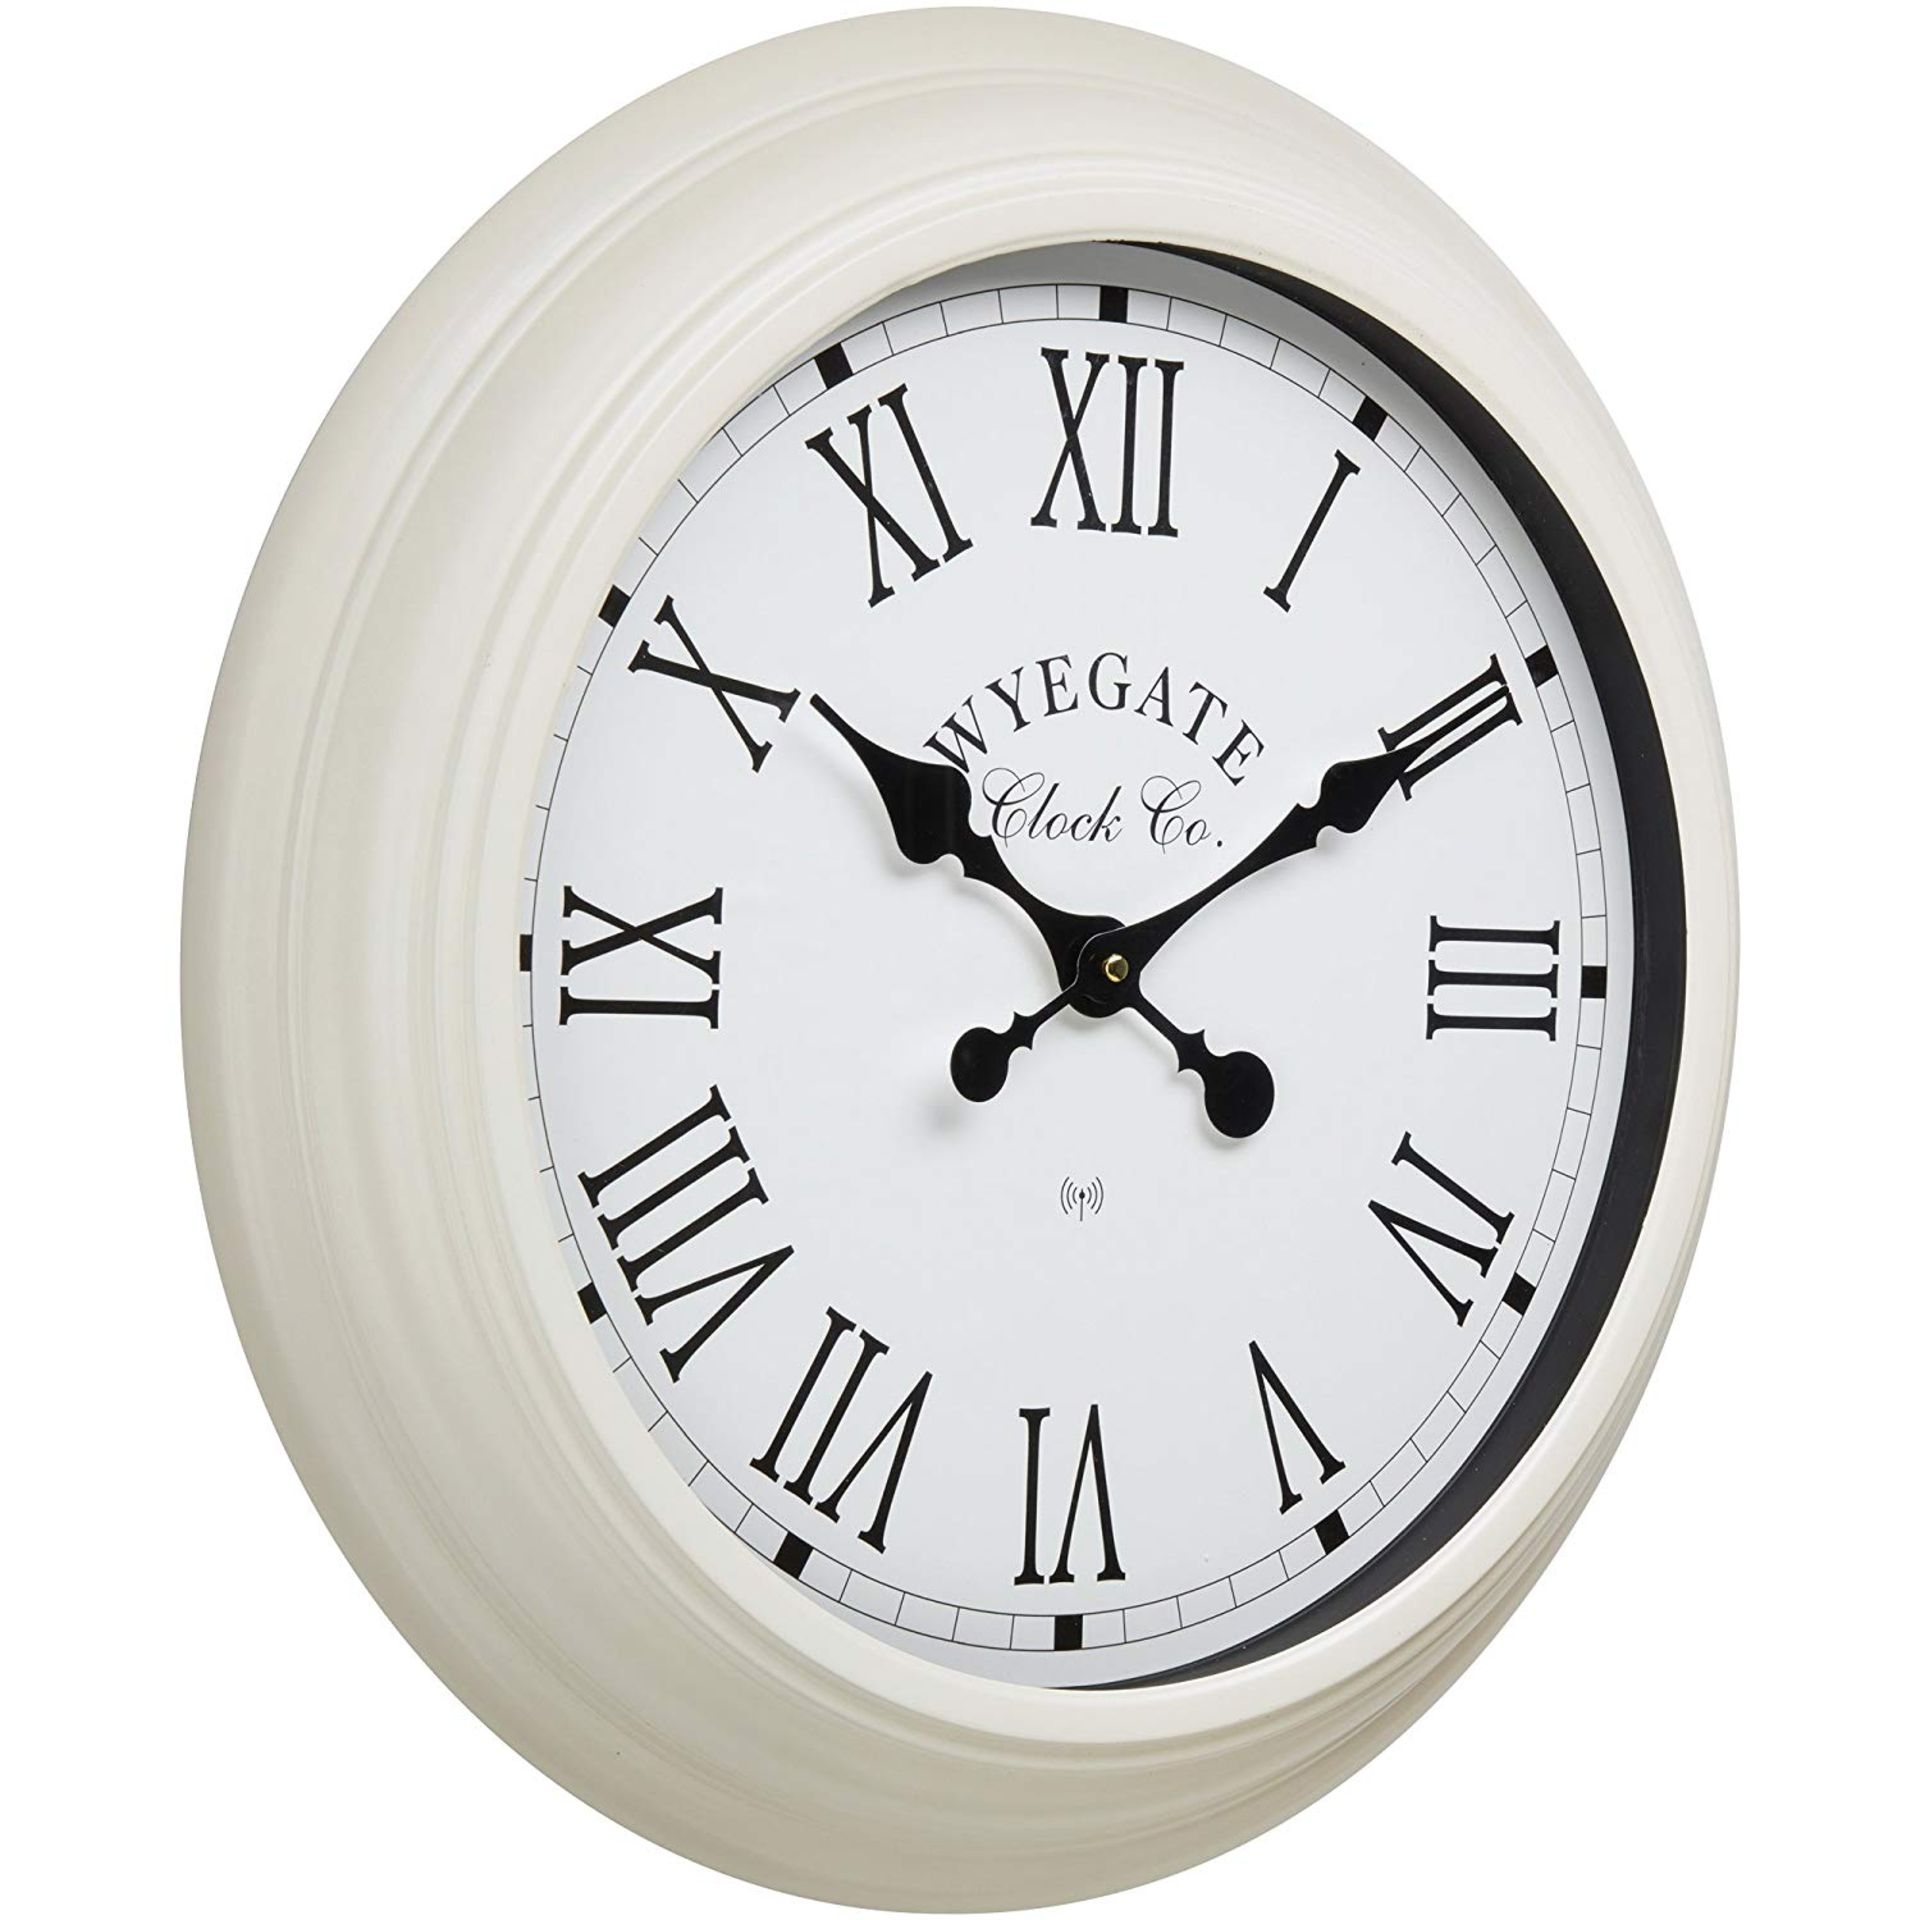 V Brand New Large Wyegate Garden/Indoor Clock (Radio Controlled) - 50cm - Cream - RRP £29.99 - Roman - Image 2 of 2